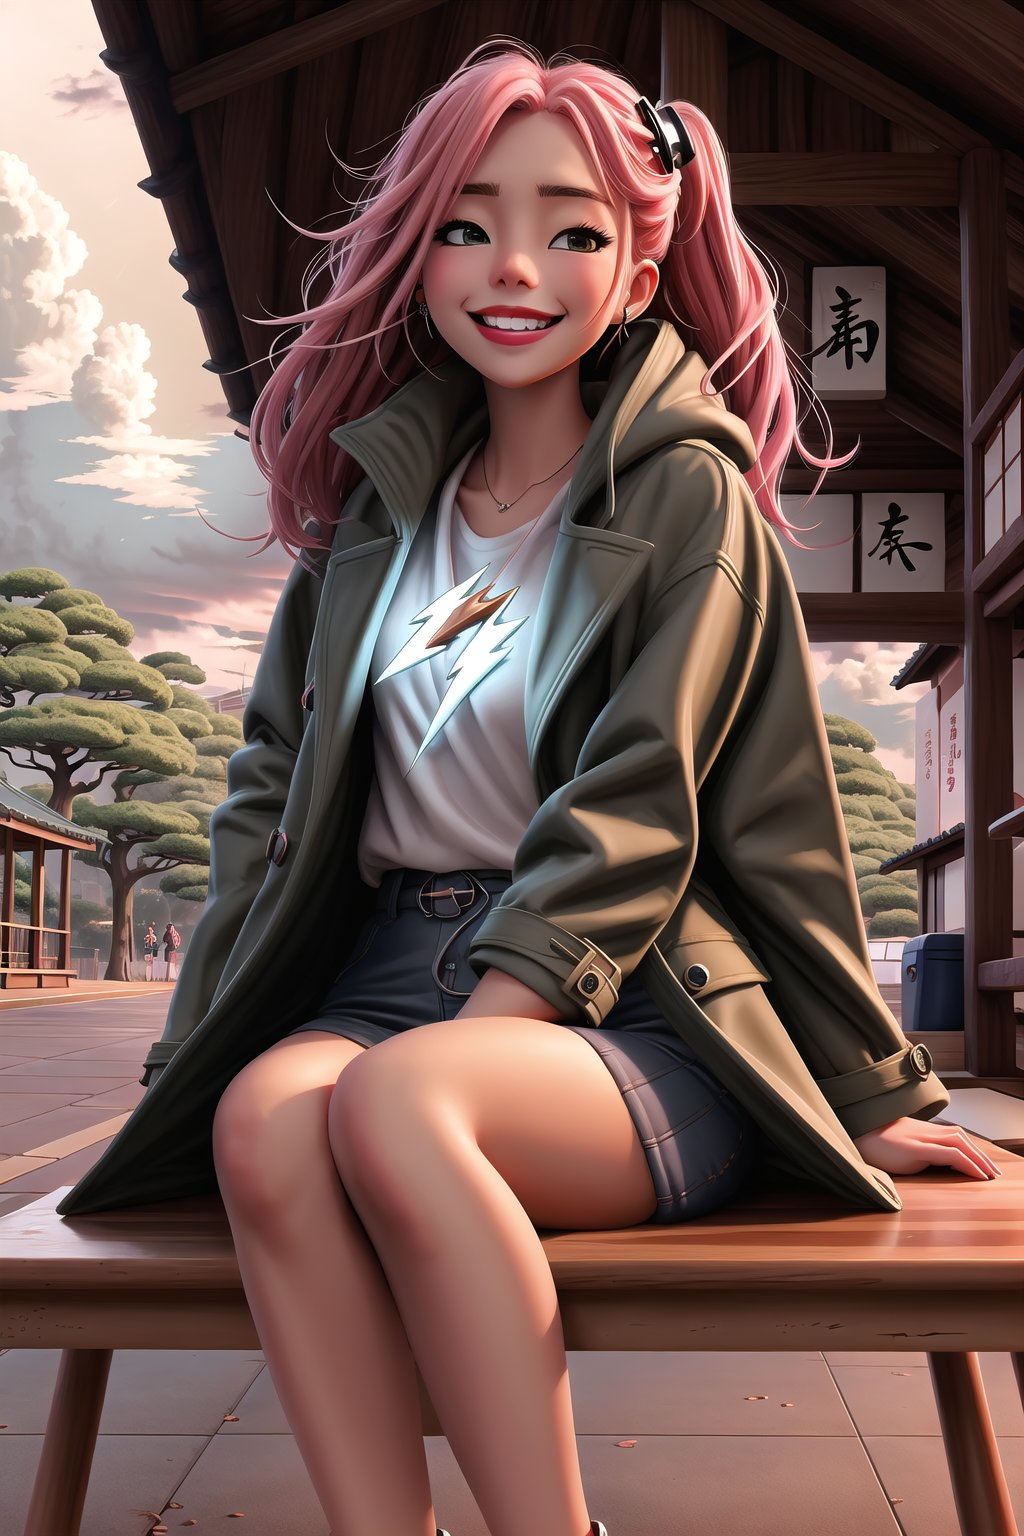 DonMl1ghtning,Homework Desk,Thick Coat CG Style,GirlfriendMix_v1girl cutegirl ,hotface ,happy,sitting in park,cloudy weather
,in japan